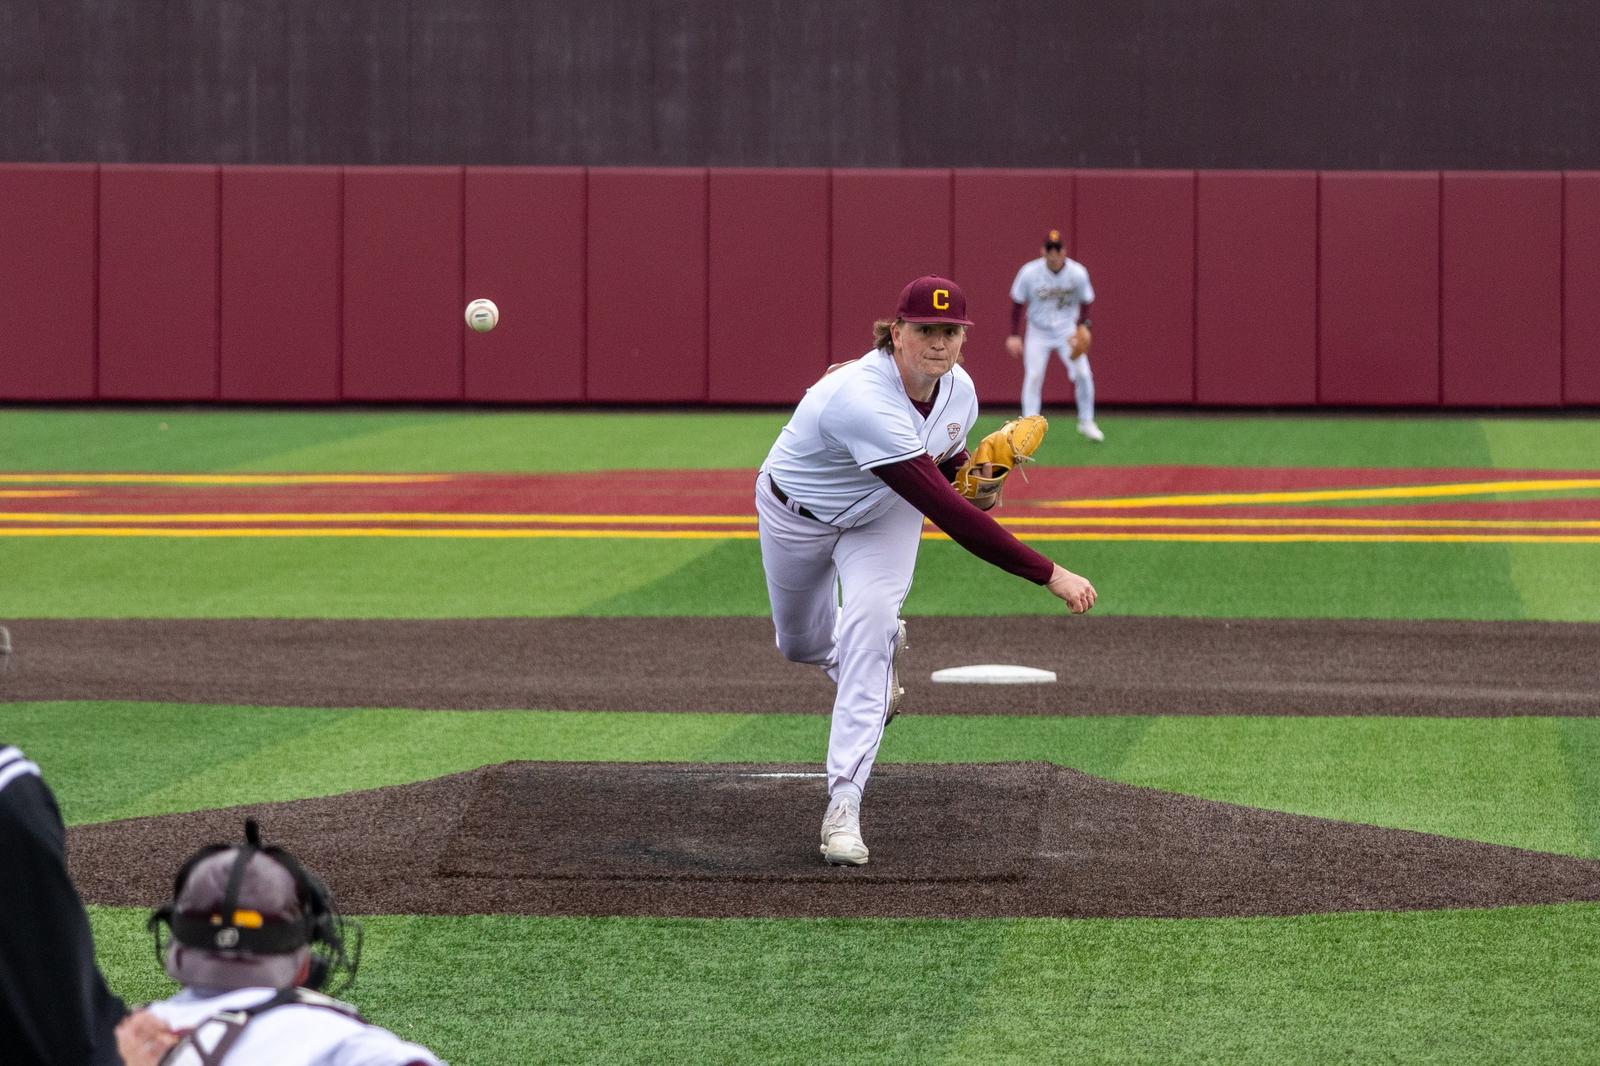 Sensational 7: Chippewa Pitchers Team Up on One-Hitter in Win at Notre Dame